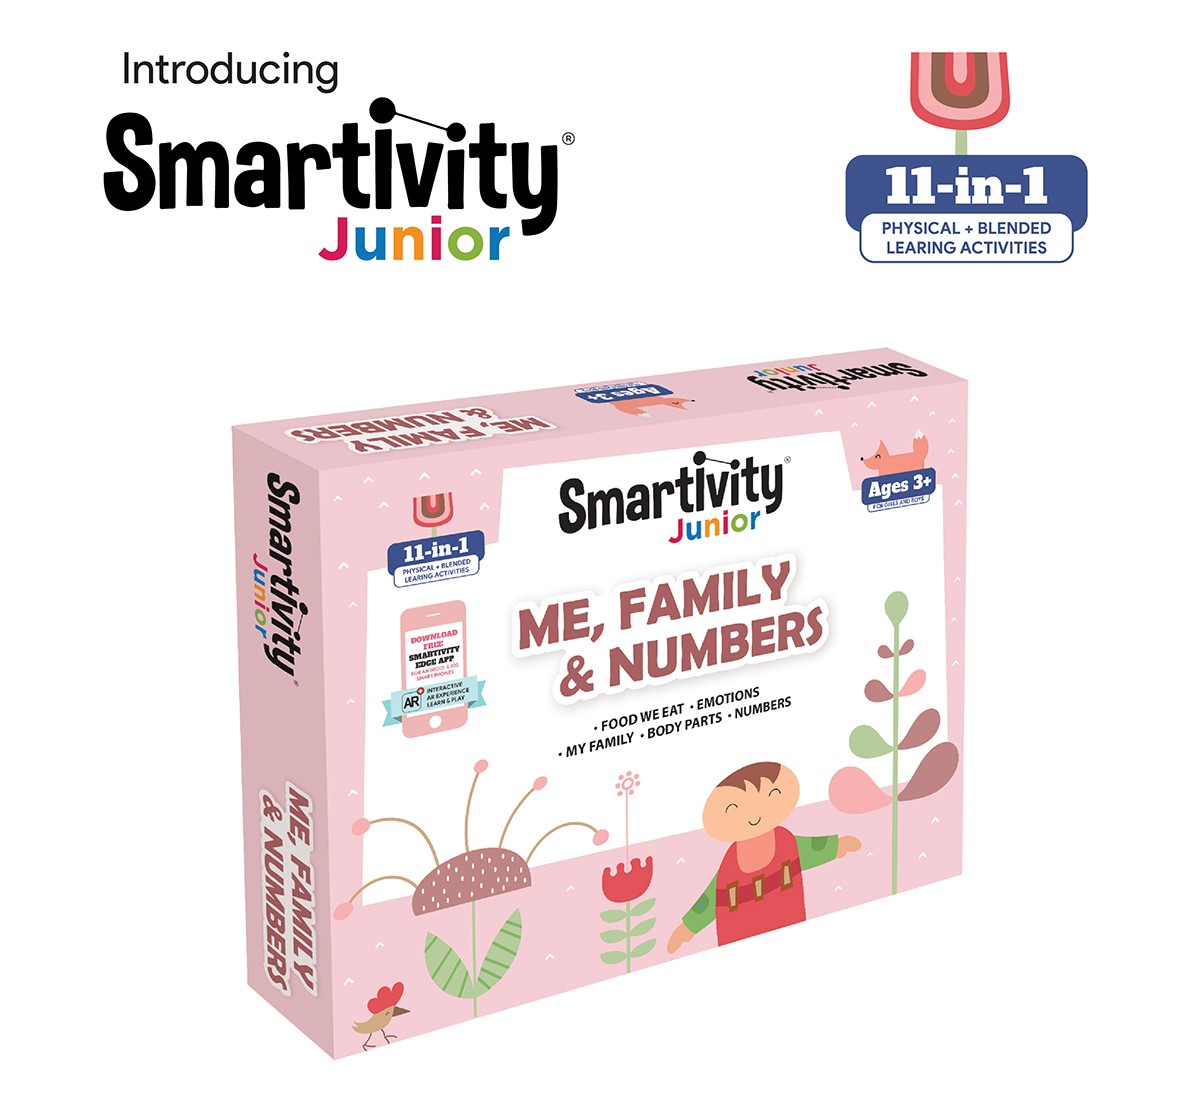 Smartivity Junior Me, Family & Numbers Pre-School STEAM Learning Educational Toy Art & Craft Play 11 in 1 Activity Kit Gift Box 2 - 5 yrs Toddler Baby Augmented Reality Colouring FREE APP Interactive Flash Cards for Kids age 3Y+ (Multicolour)